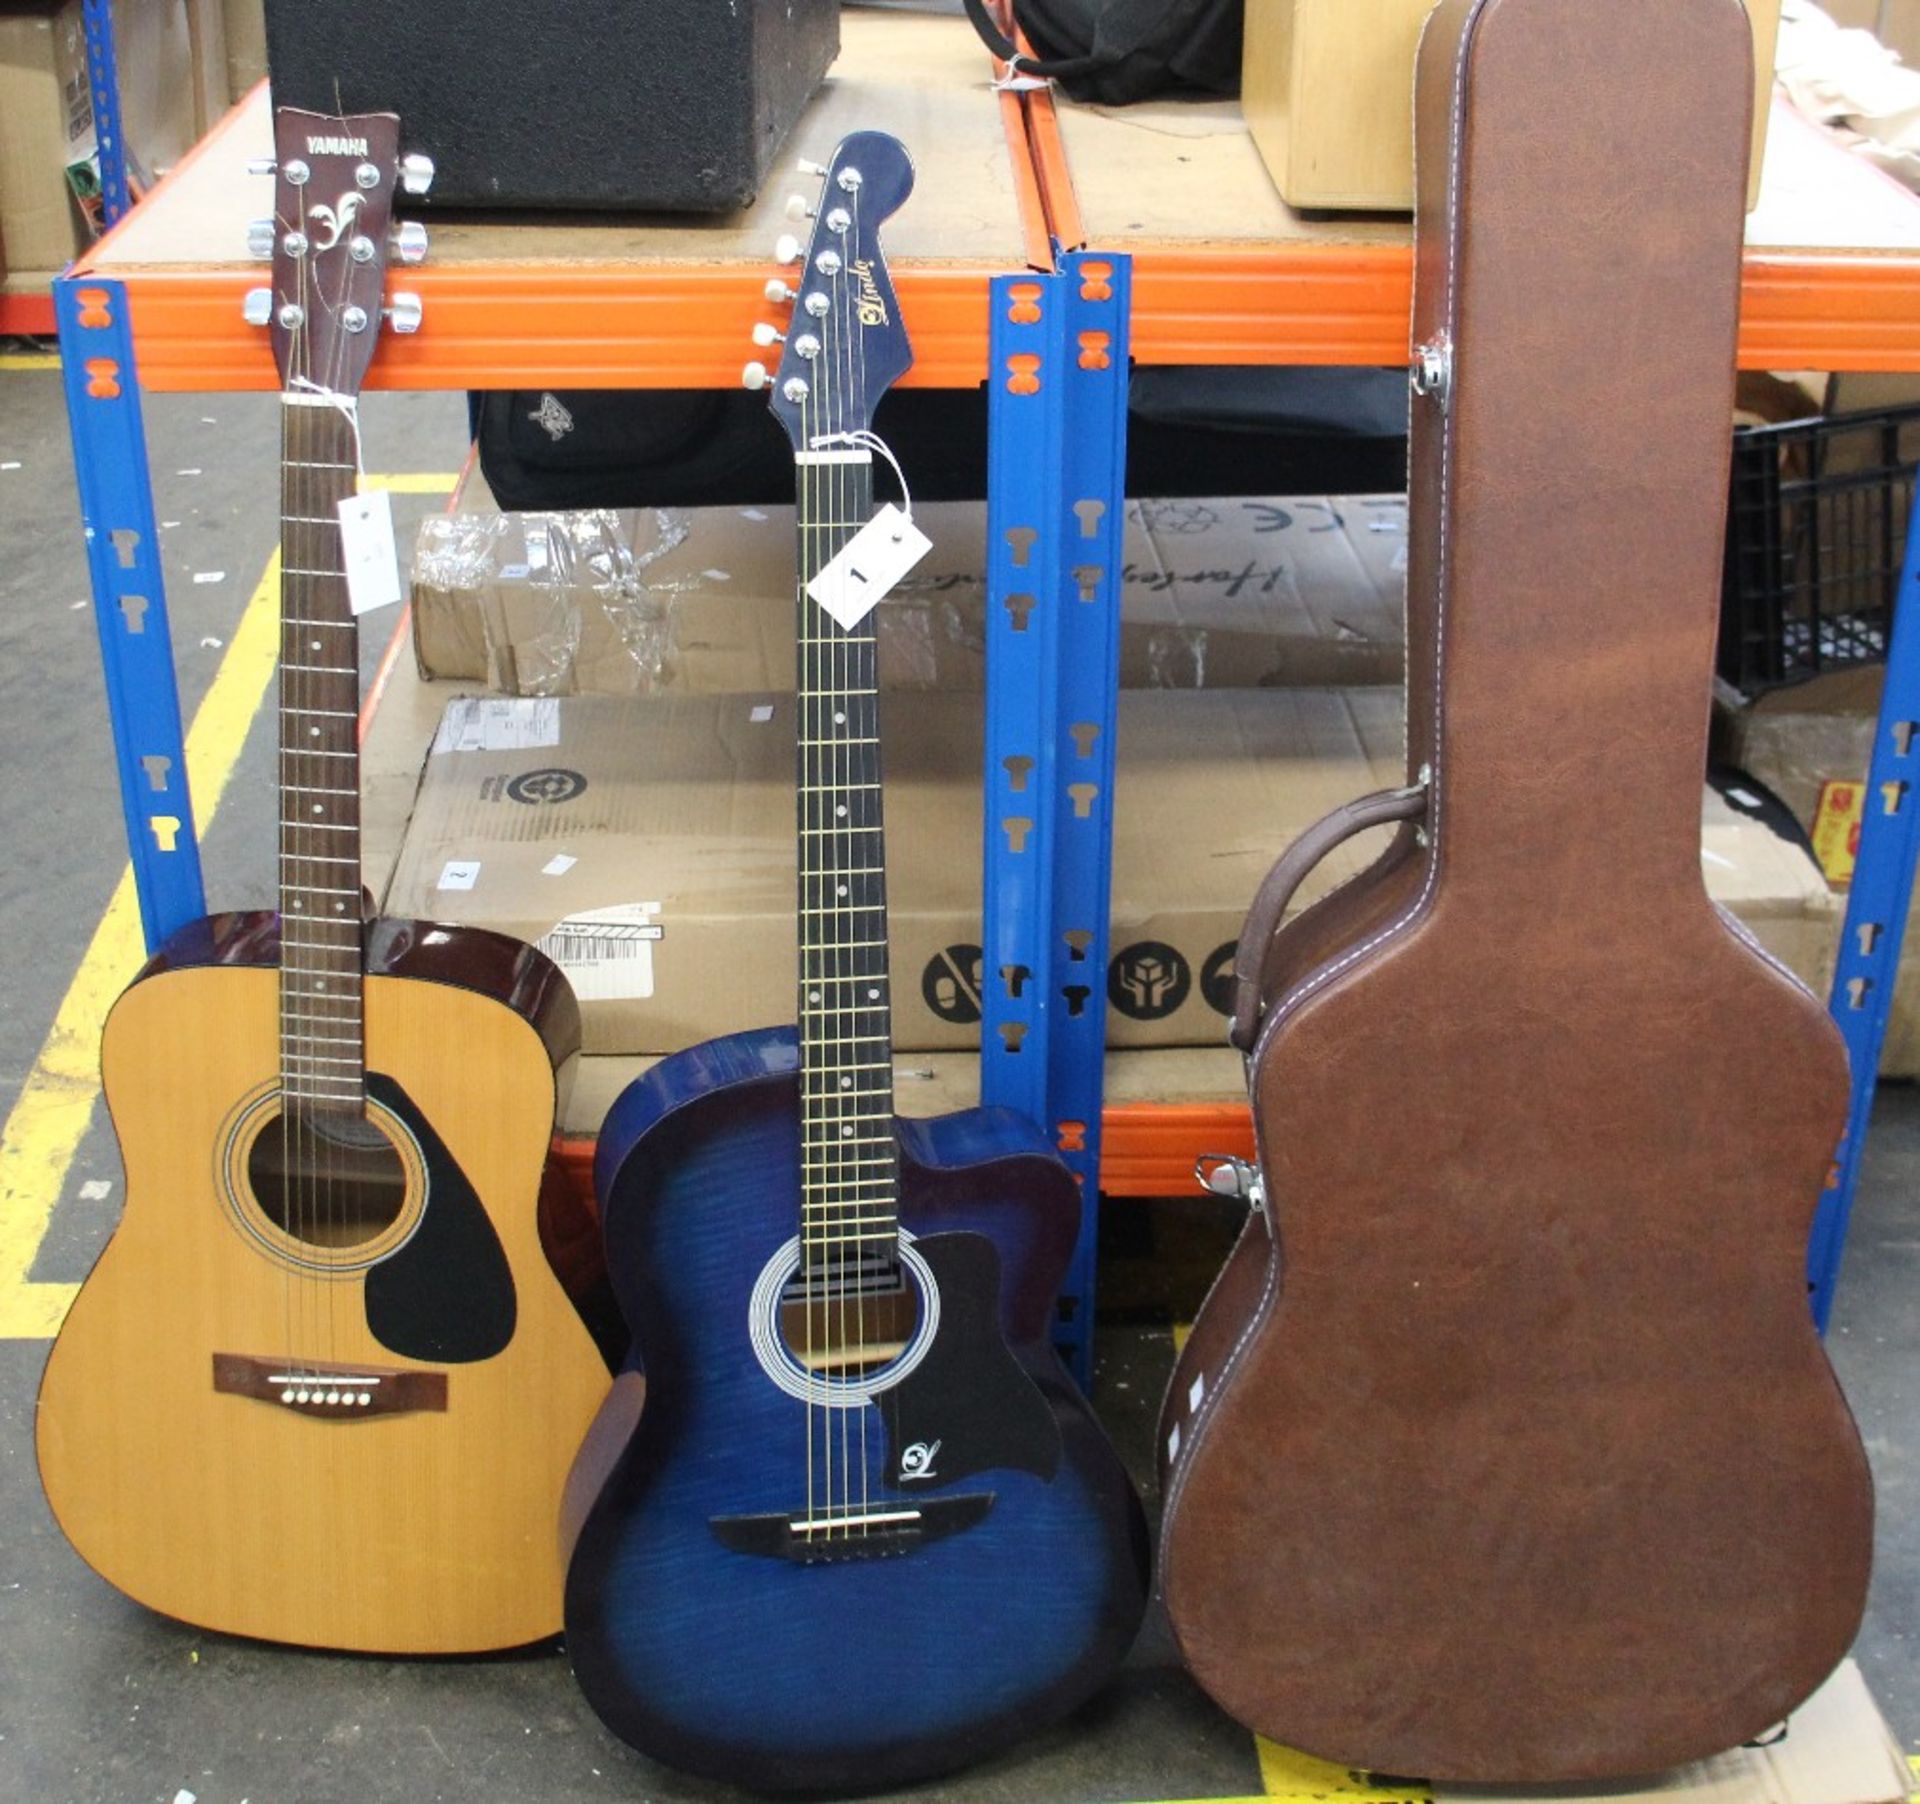 A pre-owned Lindo LDG-933CTBLS acoustic guitar and a Yamaha F-310 acoustic guitar with a hard case.